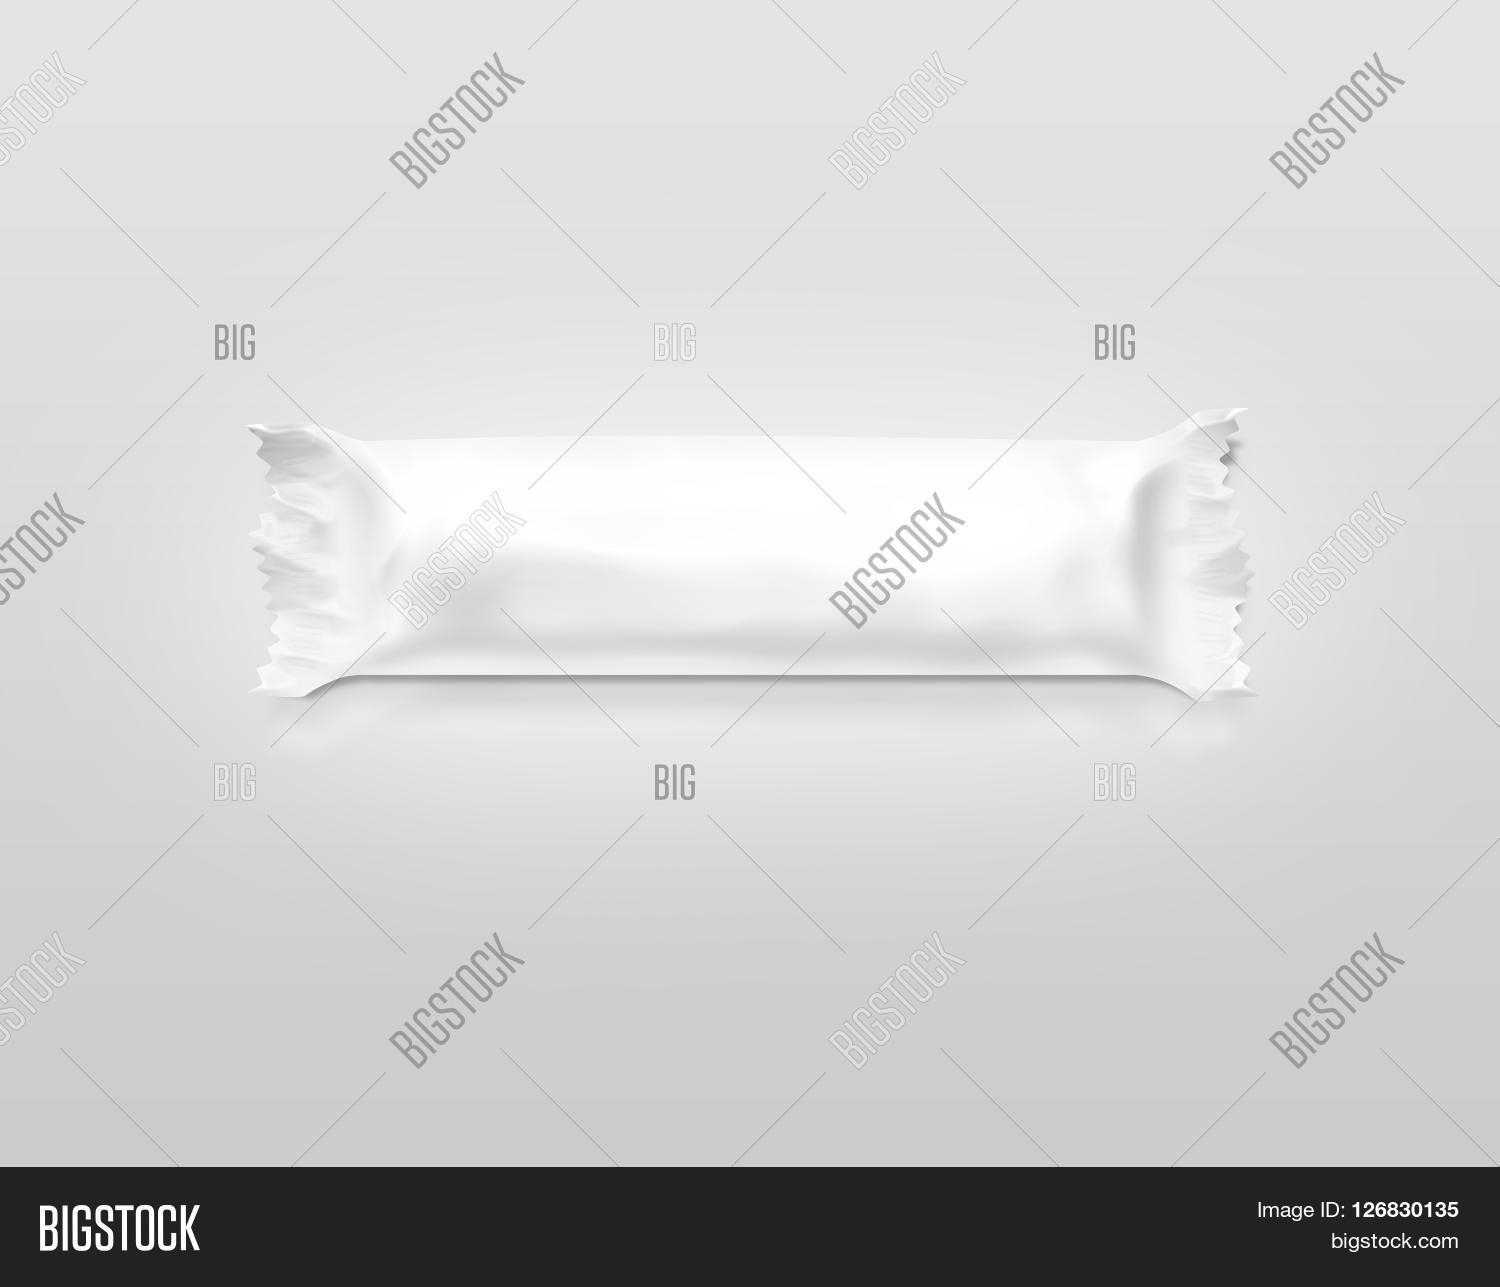 Blank White Candy Bar Image & Photo (Free Trial) | Bigstock With Regard To Blank Candy Bar Wrapper Template